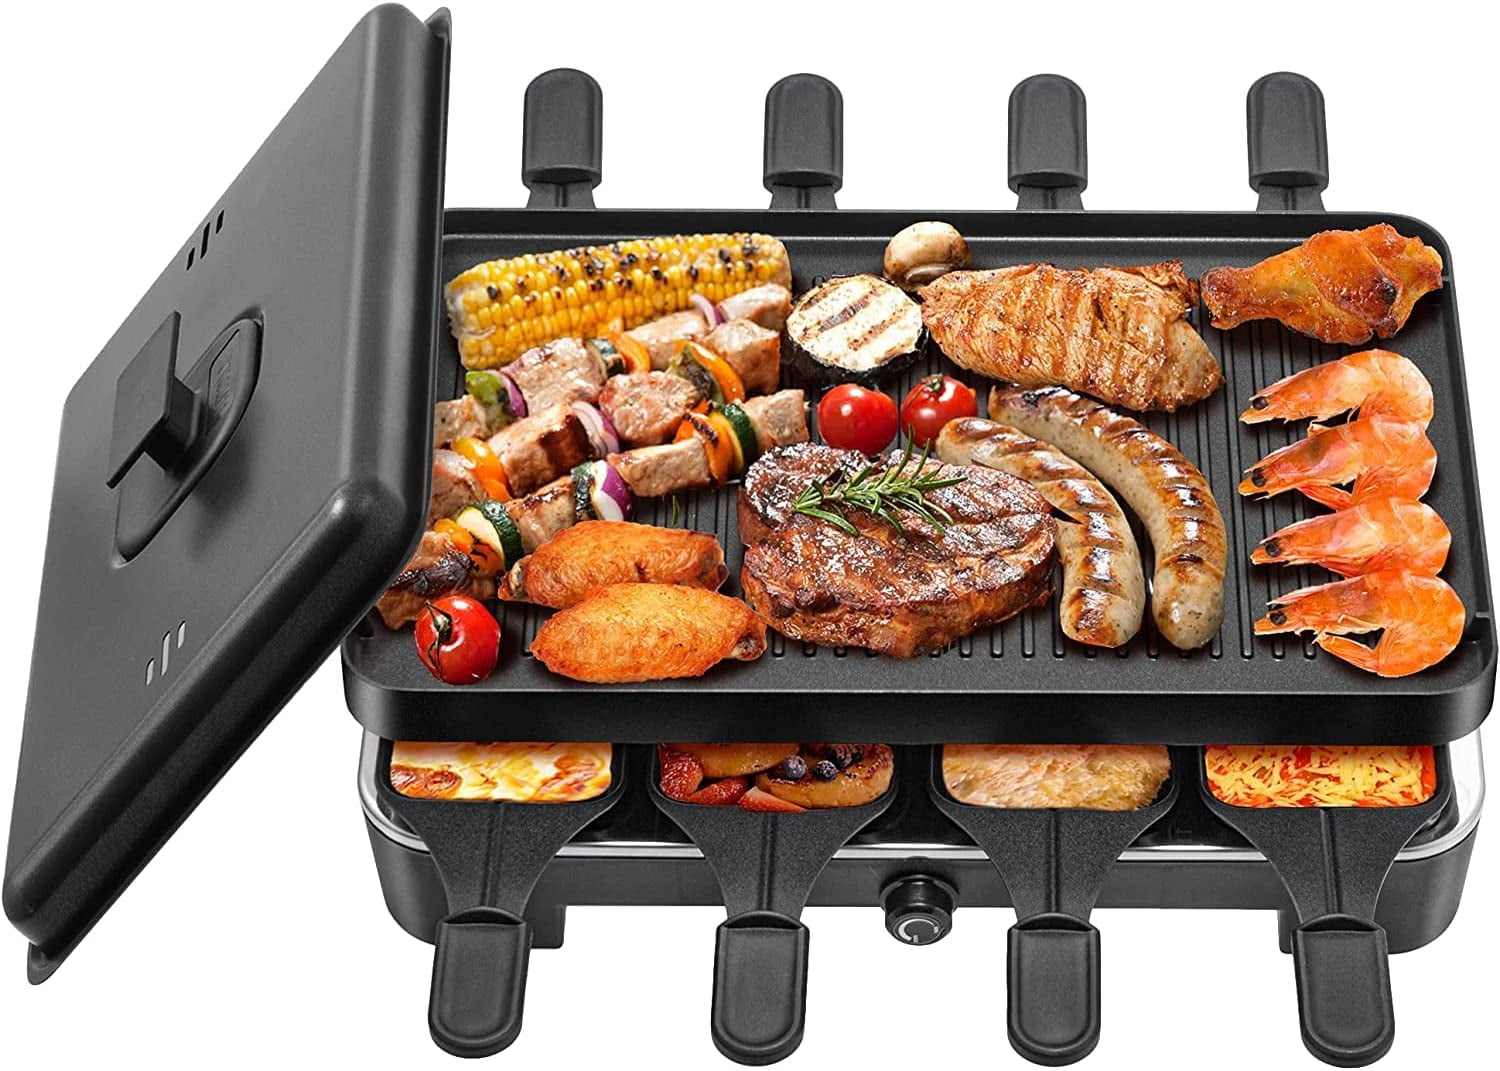 Enjoy Cooking Party Electric Barbecue Bamboo Portable Griddle Non-Stick Table Top Grill BBQ Indoor Outdoor Grilling Barbecue Smokeless Patio Home 